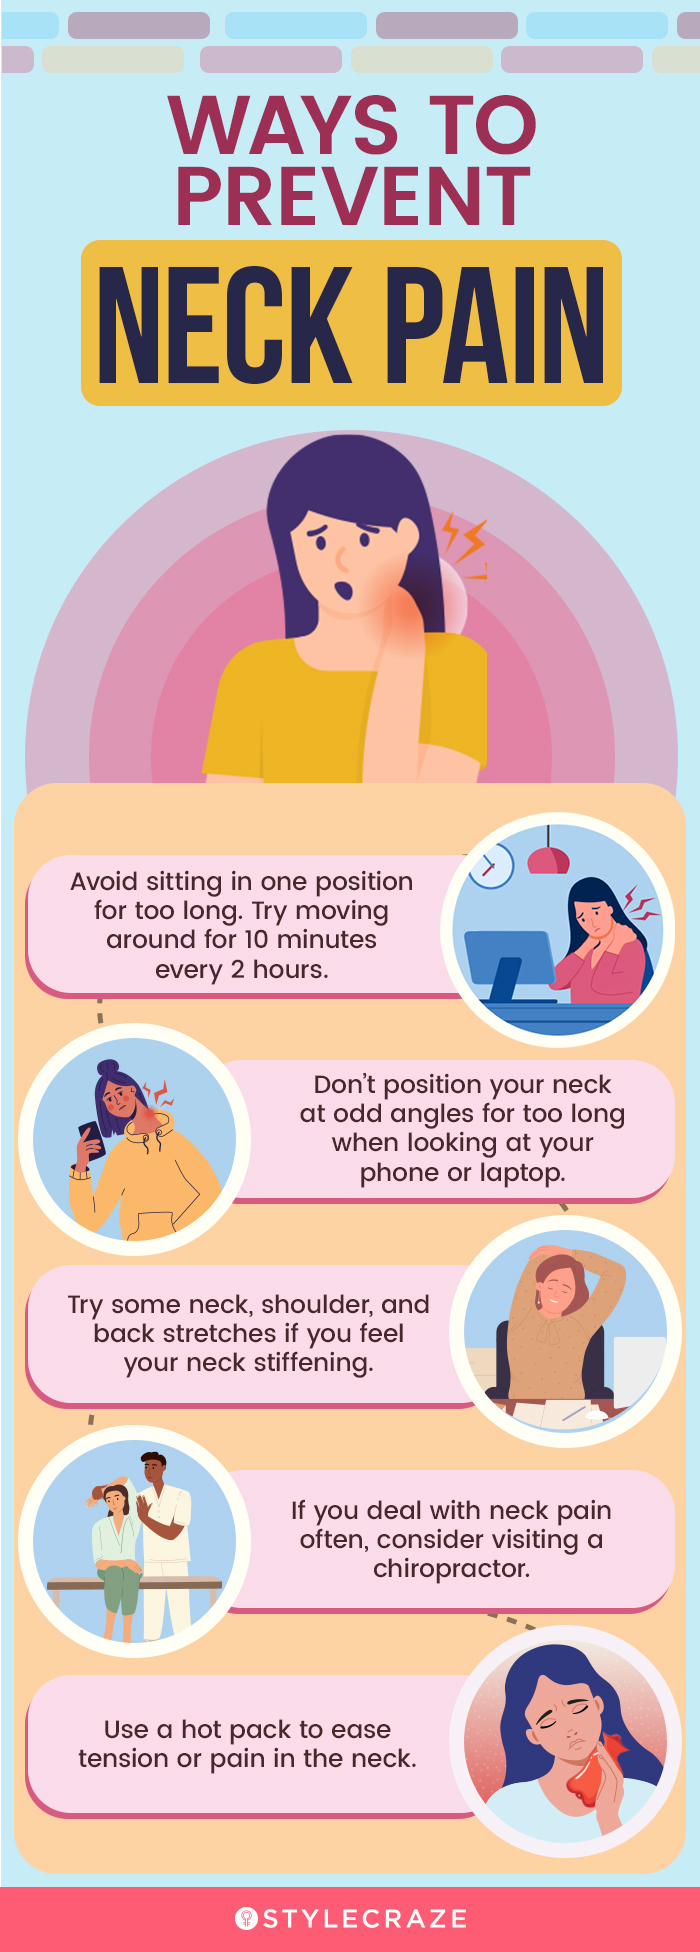 ways to prevent neck pain [infographic]